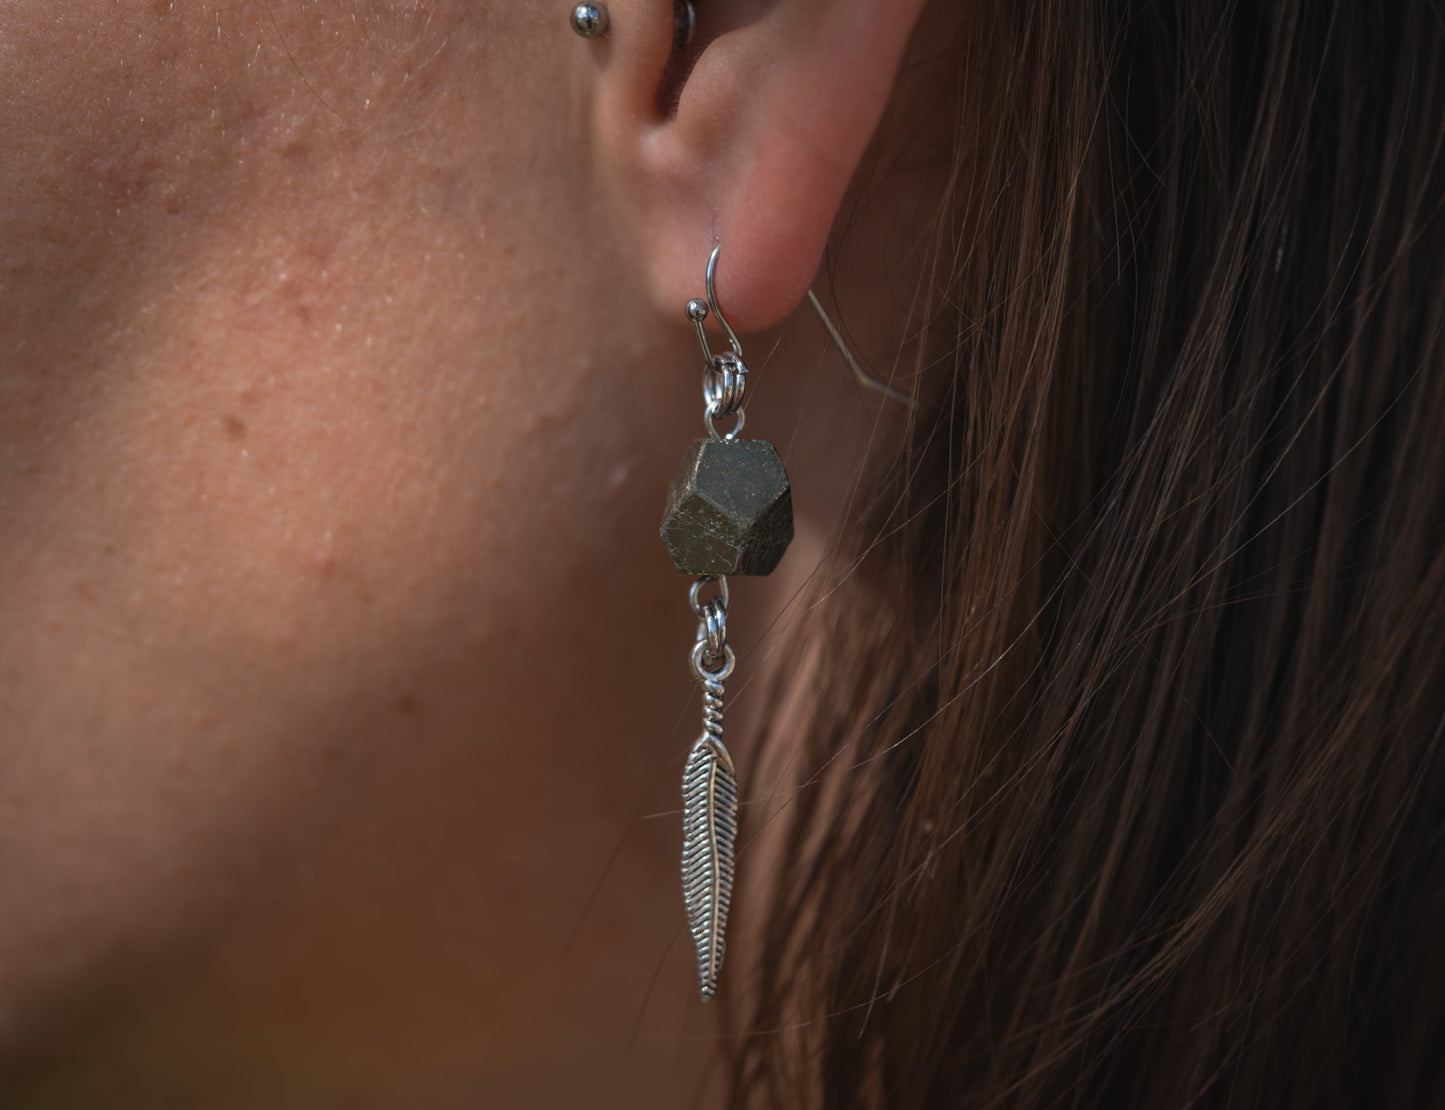 'Kick the Sh*t Out of Your Problems' Pyrite Hexagonal Ball & Feather Charm Stainless Steel Earrings